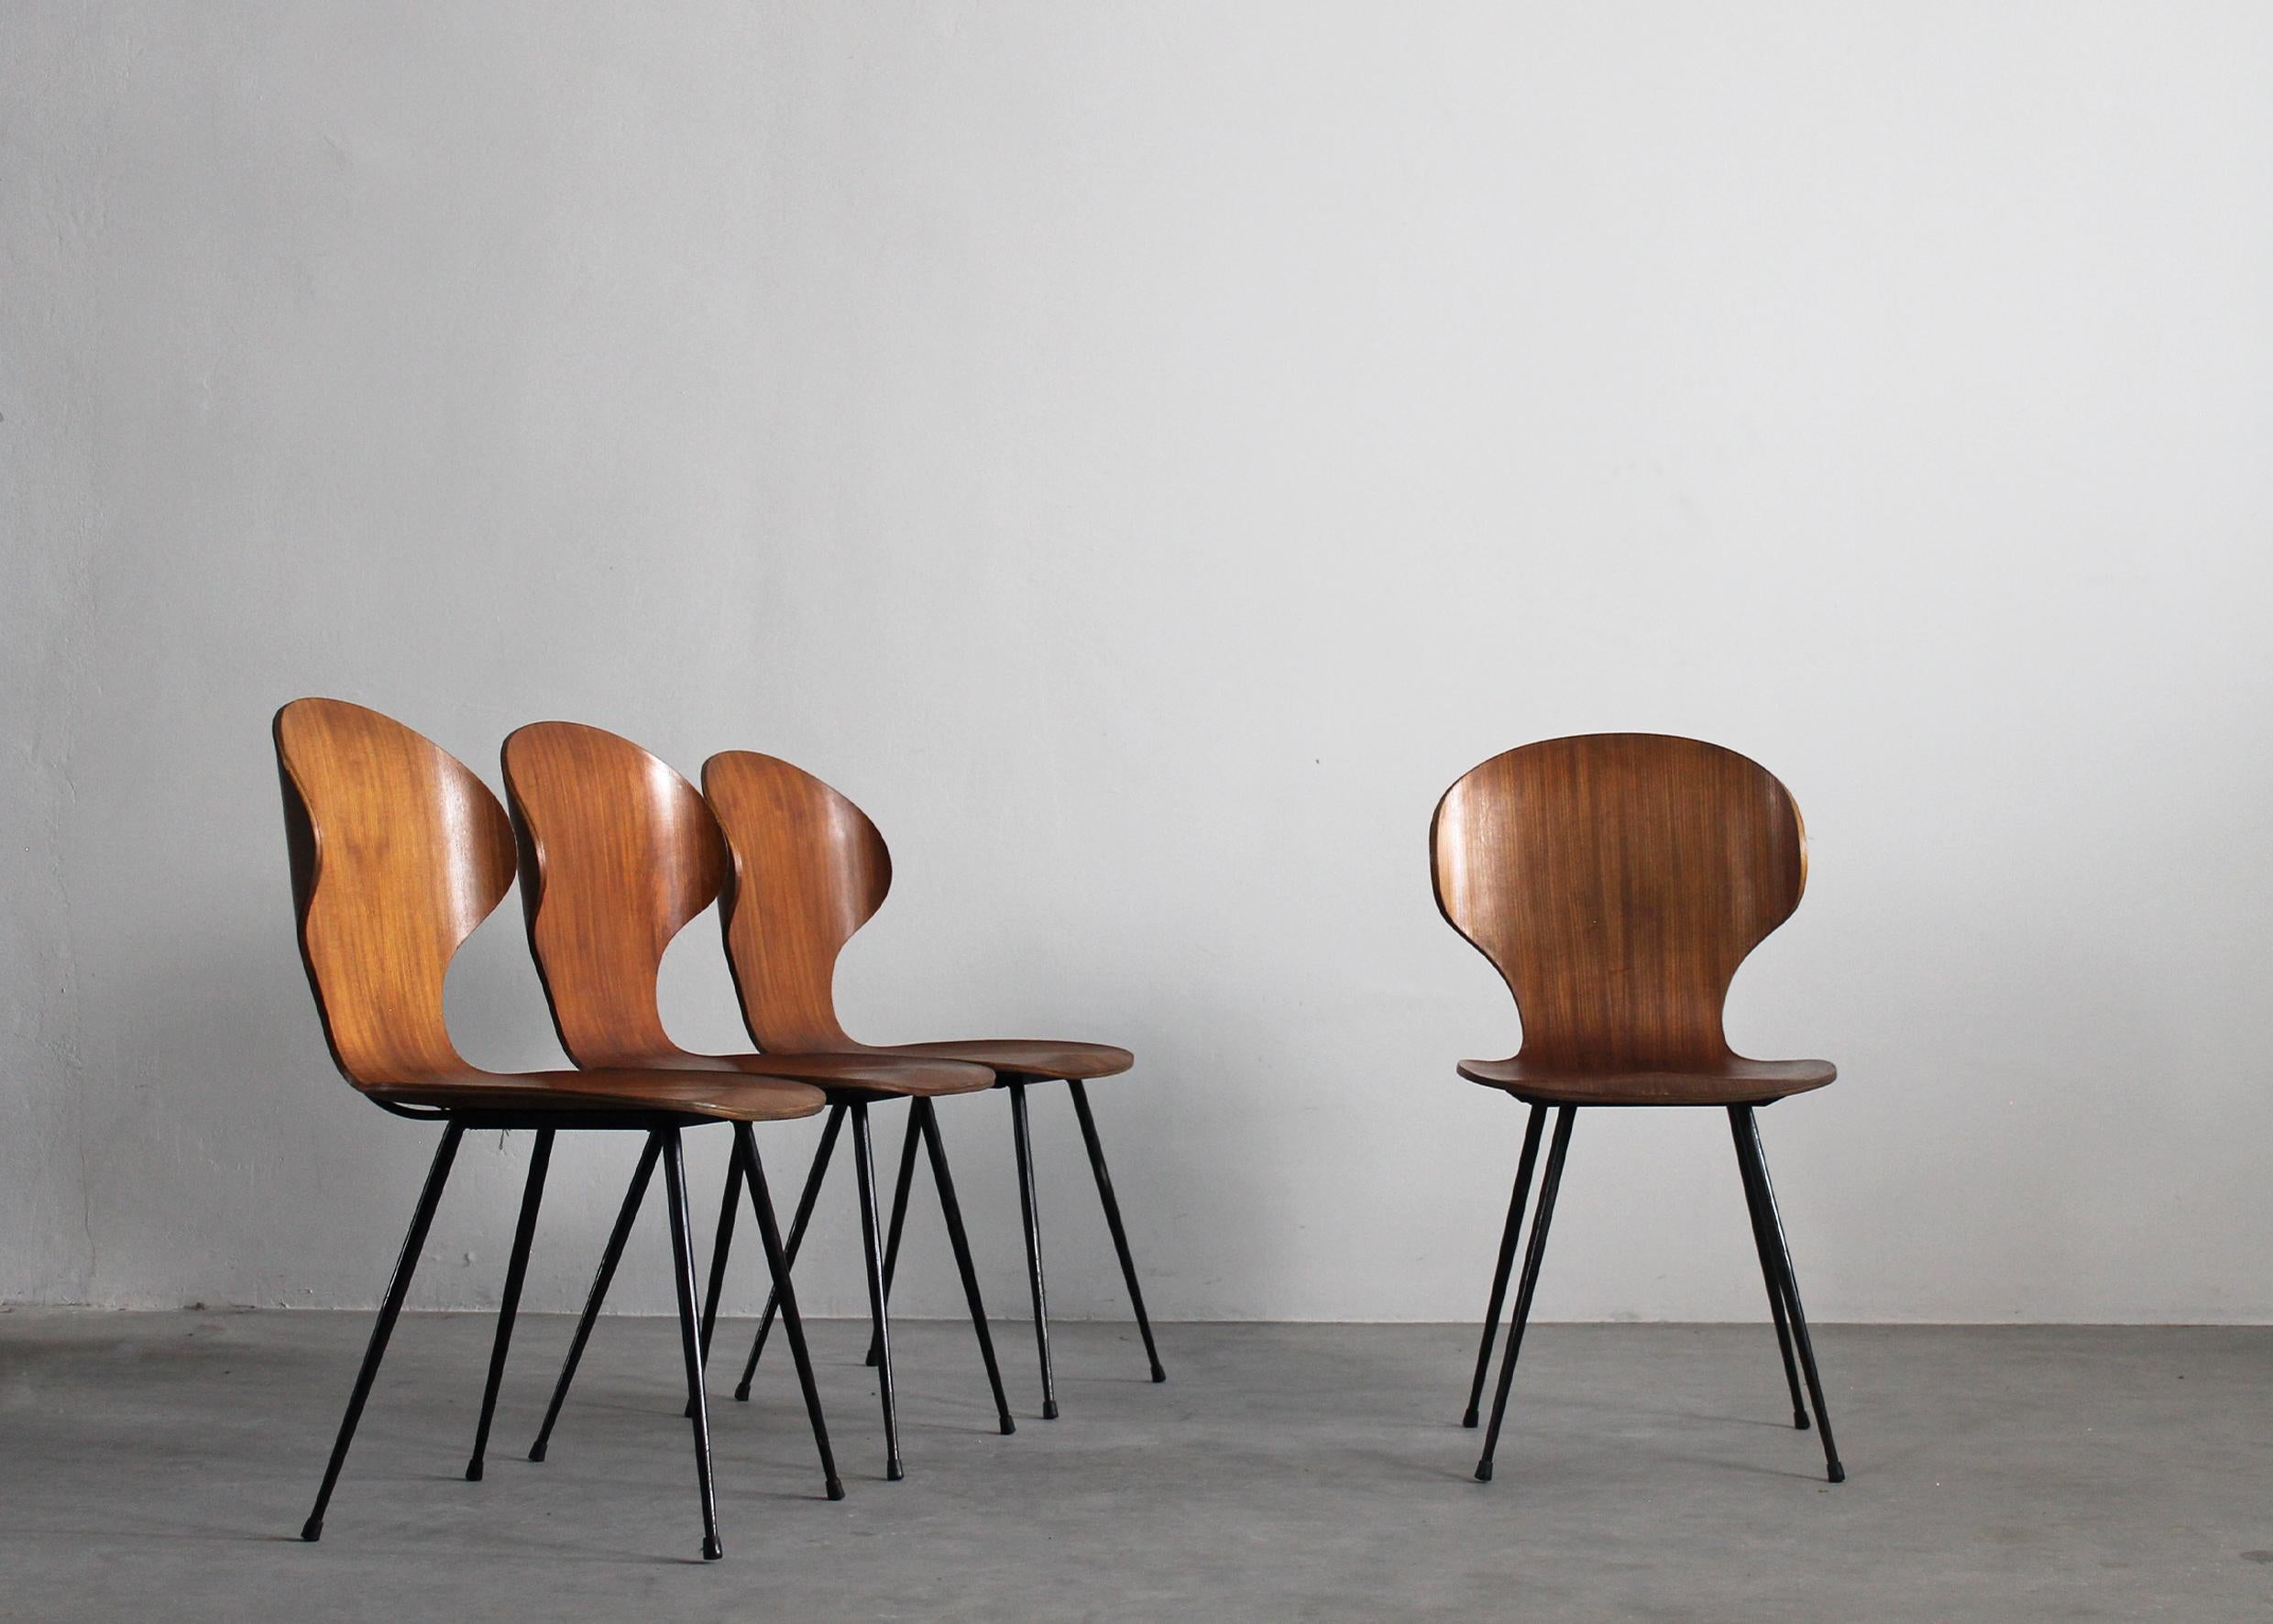 Set of four Lulli dining chairs with black painted steel legs, back, and seat in curved and shaped veneered wood, designed by Carlo Ratti for ILC Lissone in 1950s.

In Italy, at the beginning of the XX century, industries of curved solid wood